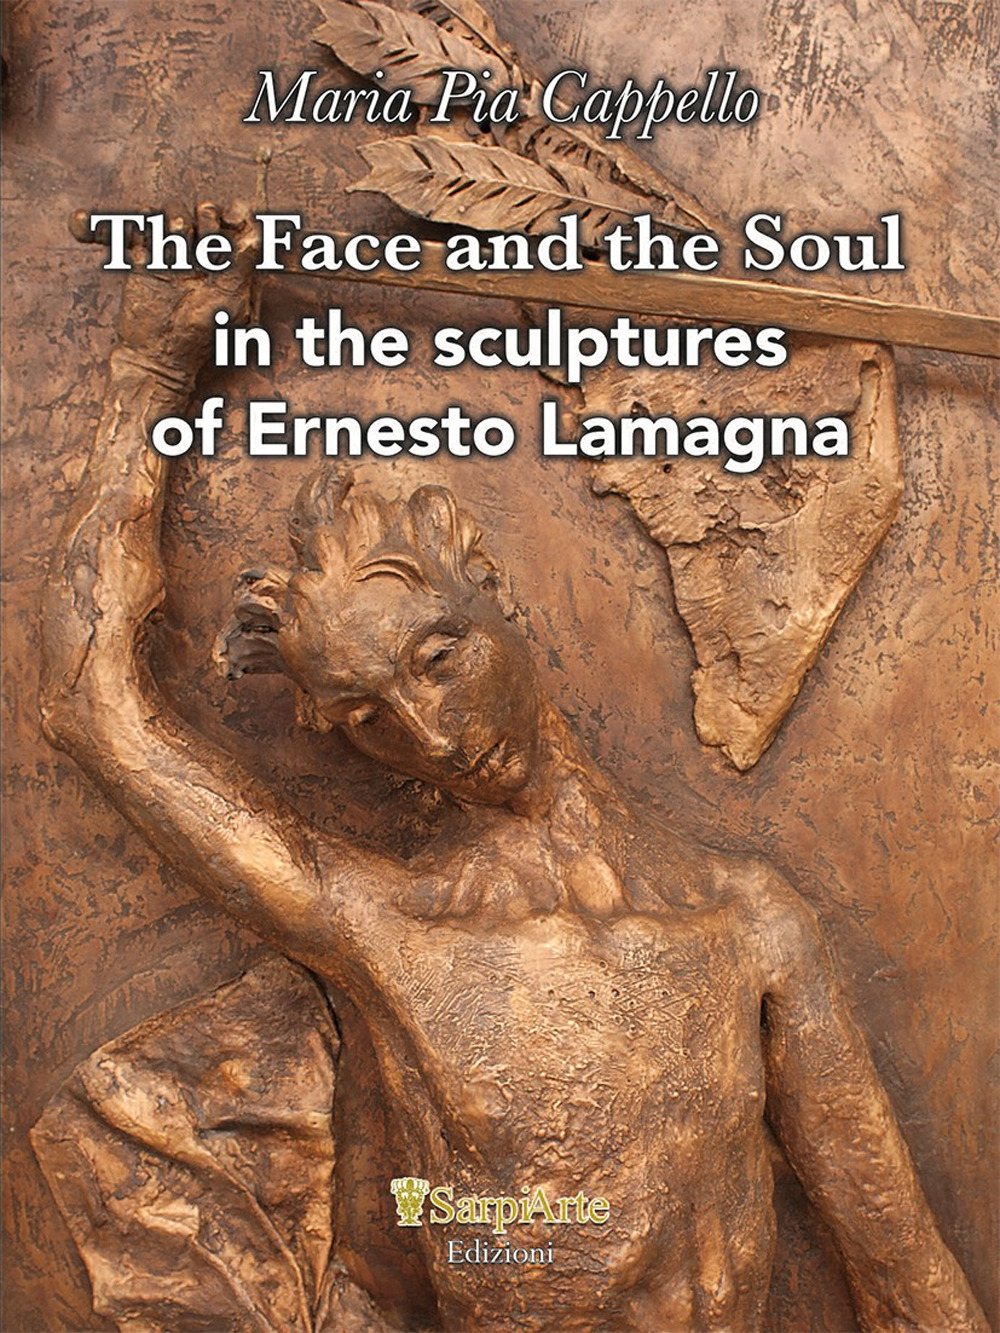 The face and the soul in the sculptures of Ernesto Lamagna